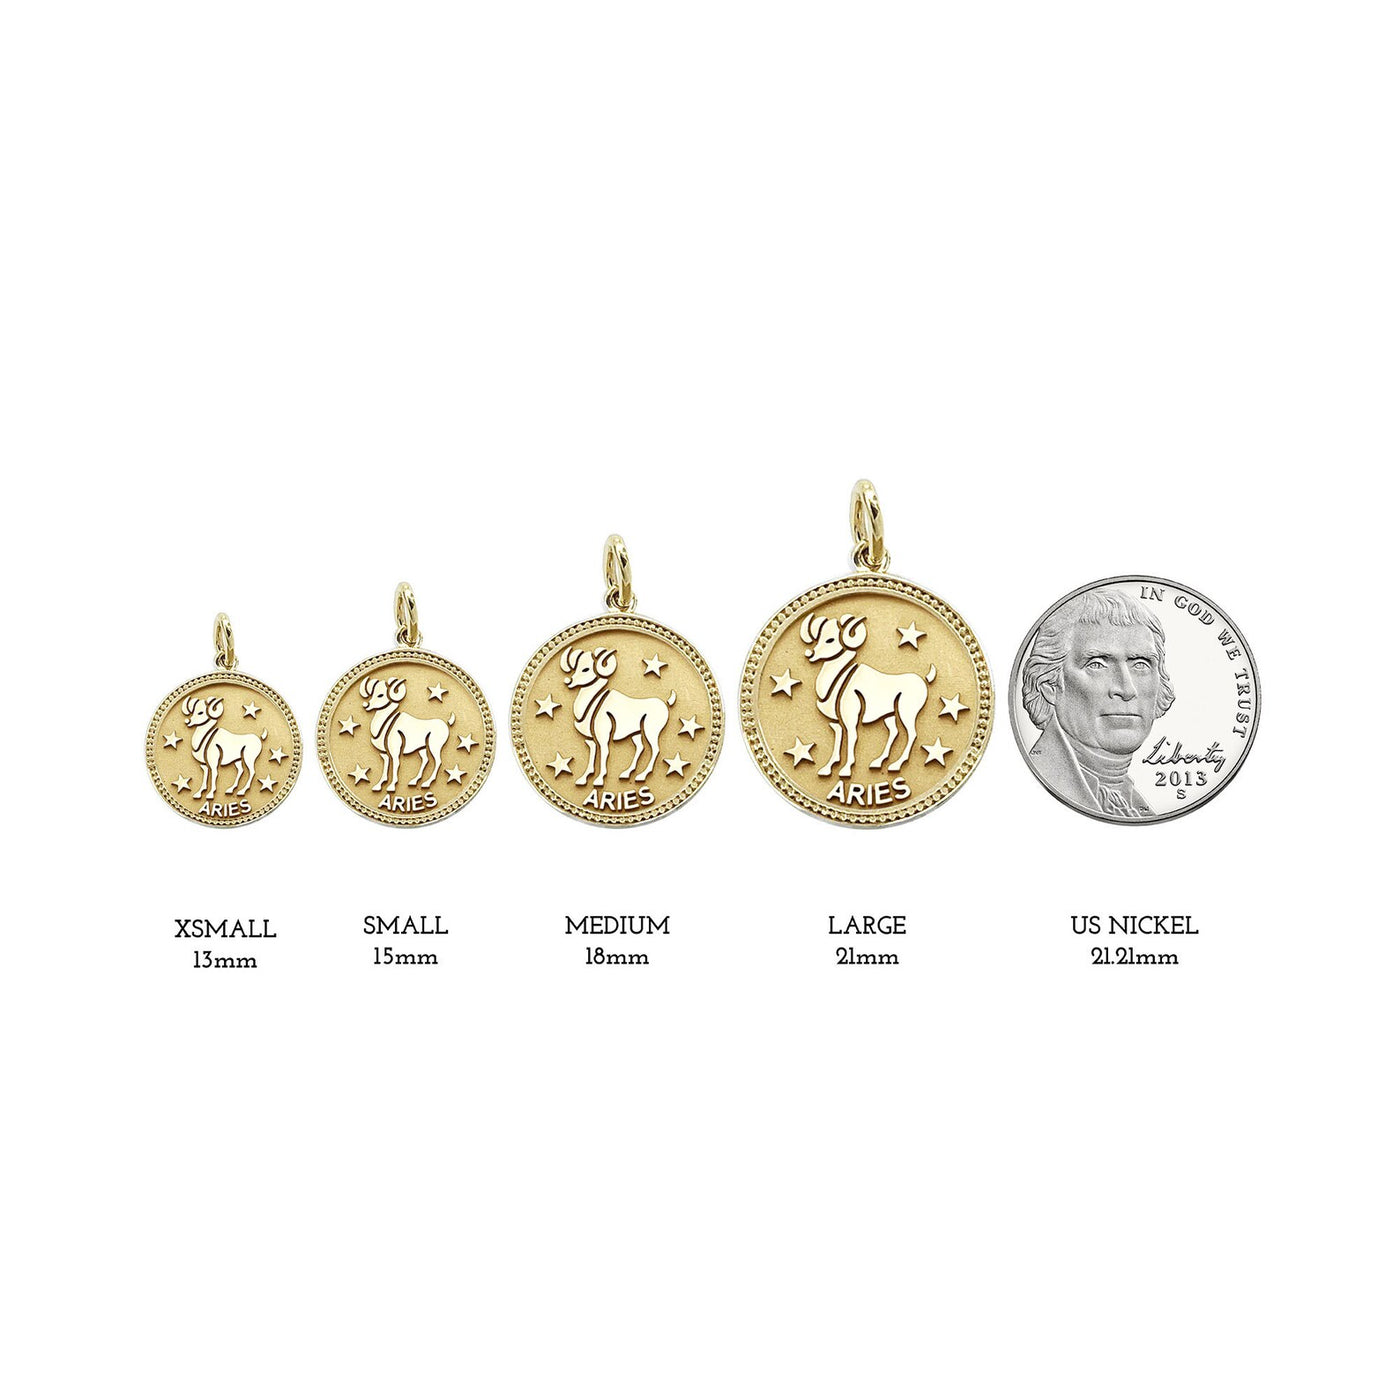 14K Aries Zodiac Coin Pendant Necklace (Complimentary Engraving)